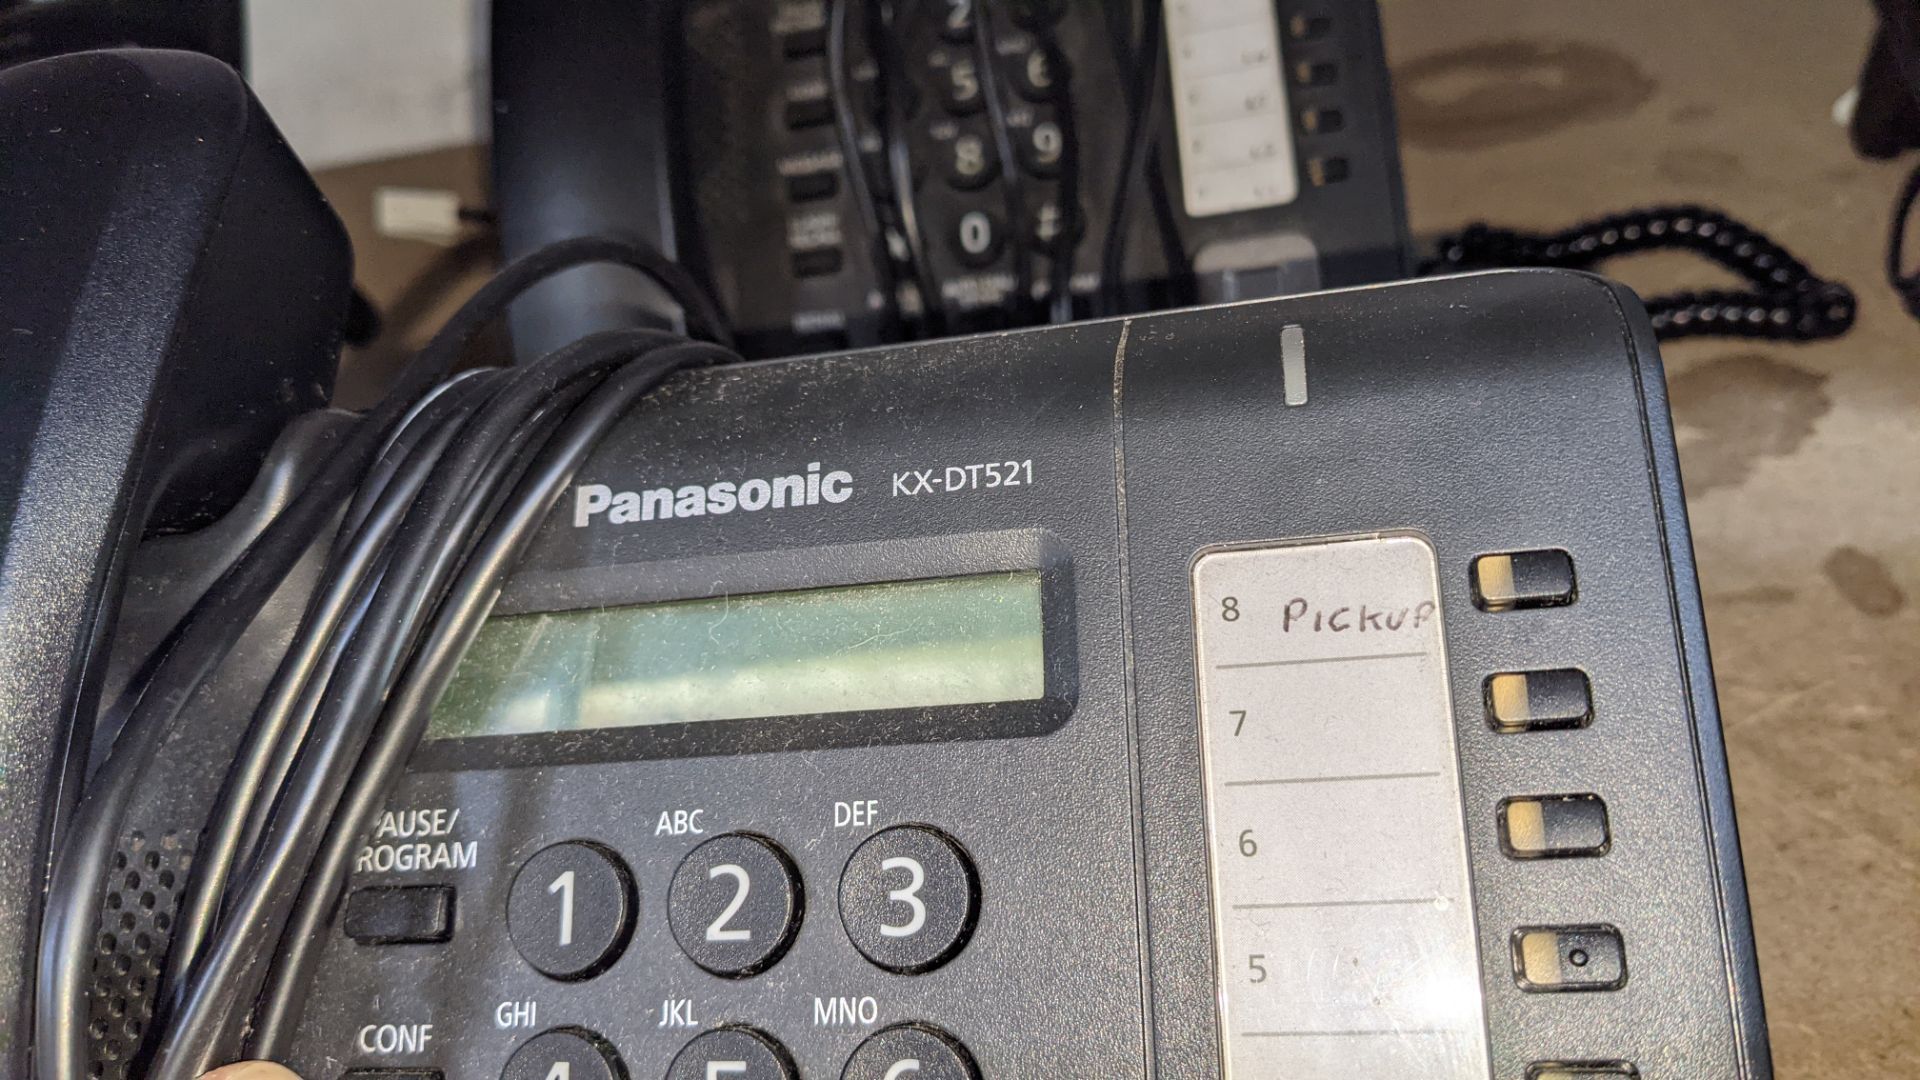 Panasonic phone system comprising KX-NS700 phone system plus 6 handsets - Image 11 of 12